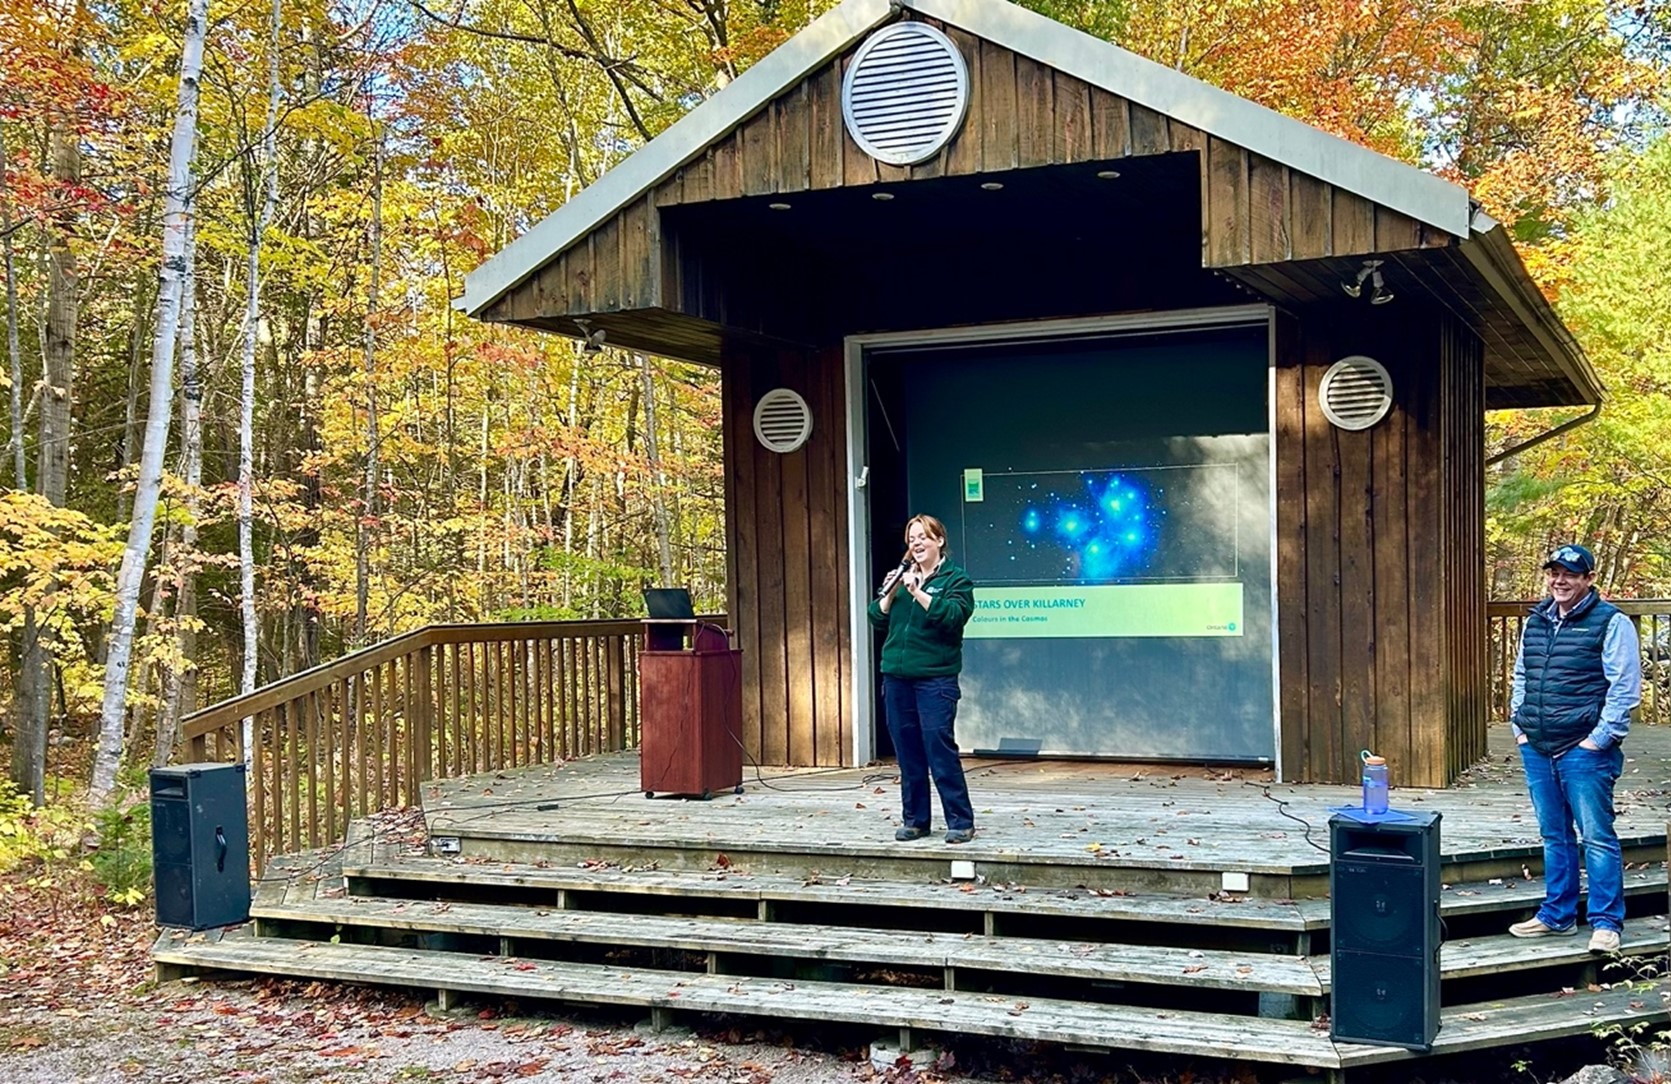 staff standing at outdoor amphitheater, presentation playing on screen